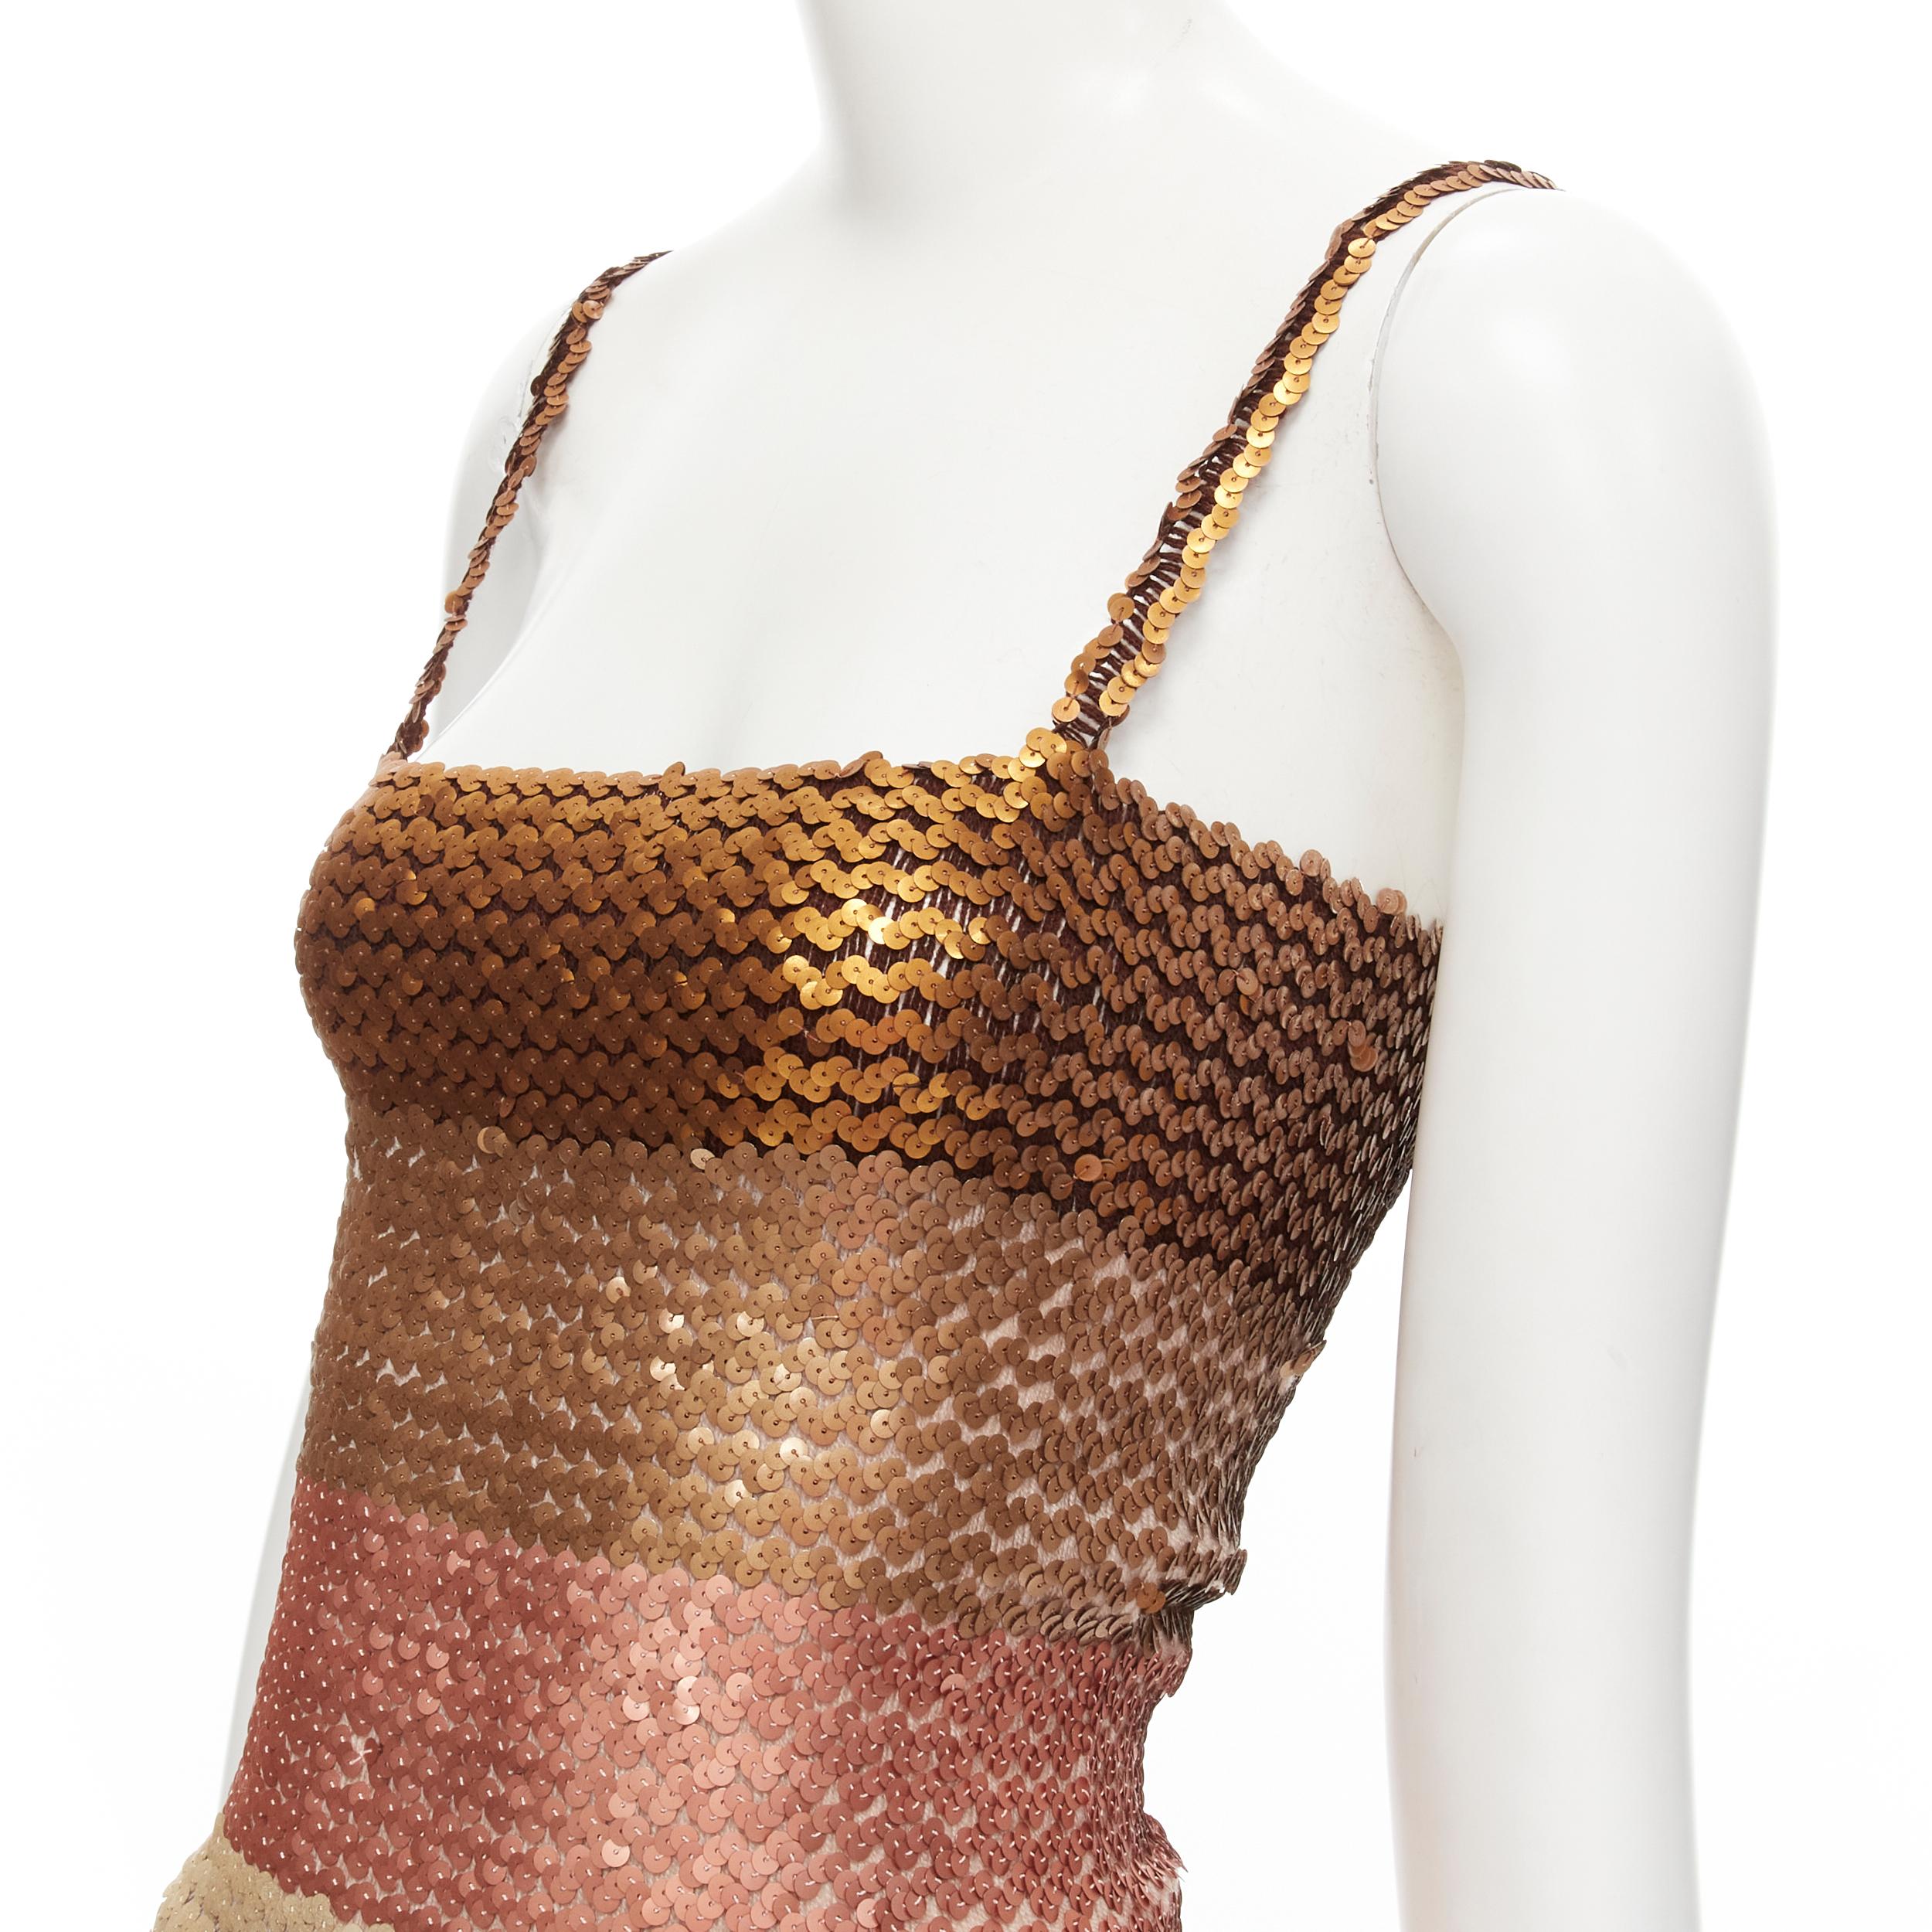 RITMO DI PERLA Vintage ombre gold sequins cami top pencil skirt dress IT44 M 
Reference: GIYG/A00151 
Brand: Ritmo Di Perla 
Material: Acetate 
Color: Gold 
Pattern: Solid 
Extra Detail: Stretch fit. Sequinned camisole top and skirt set. 
Made in: